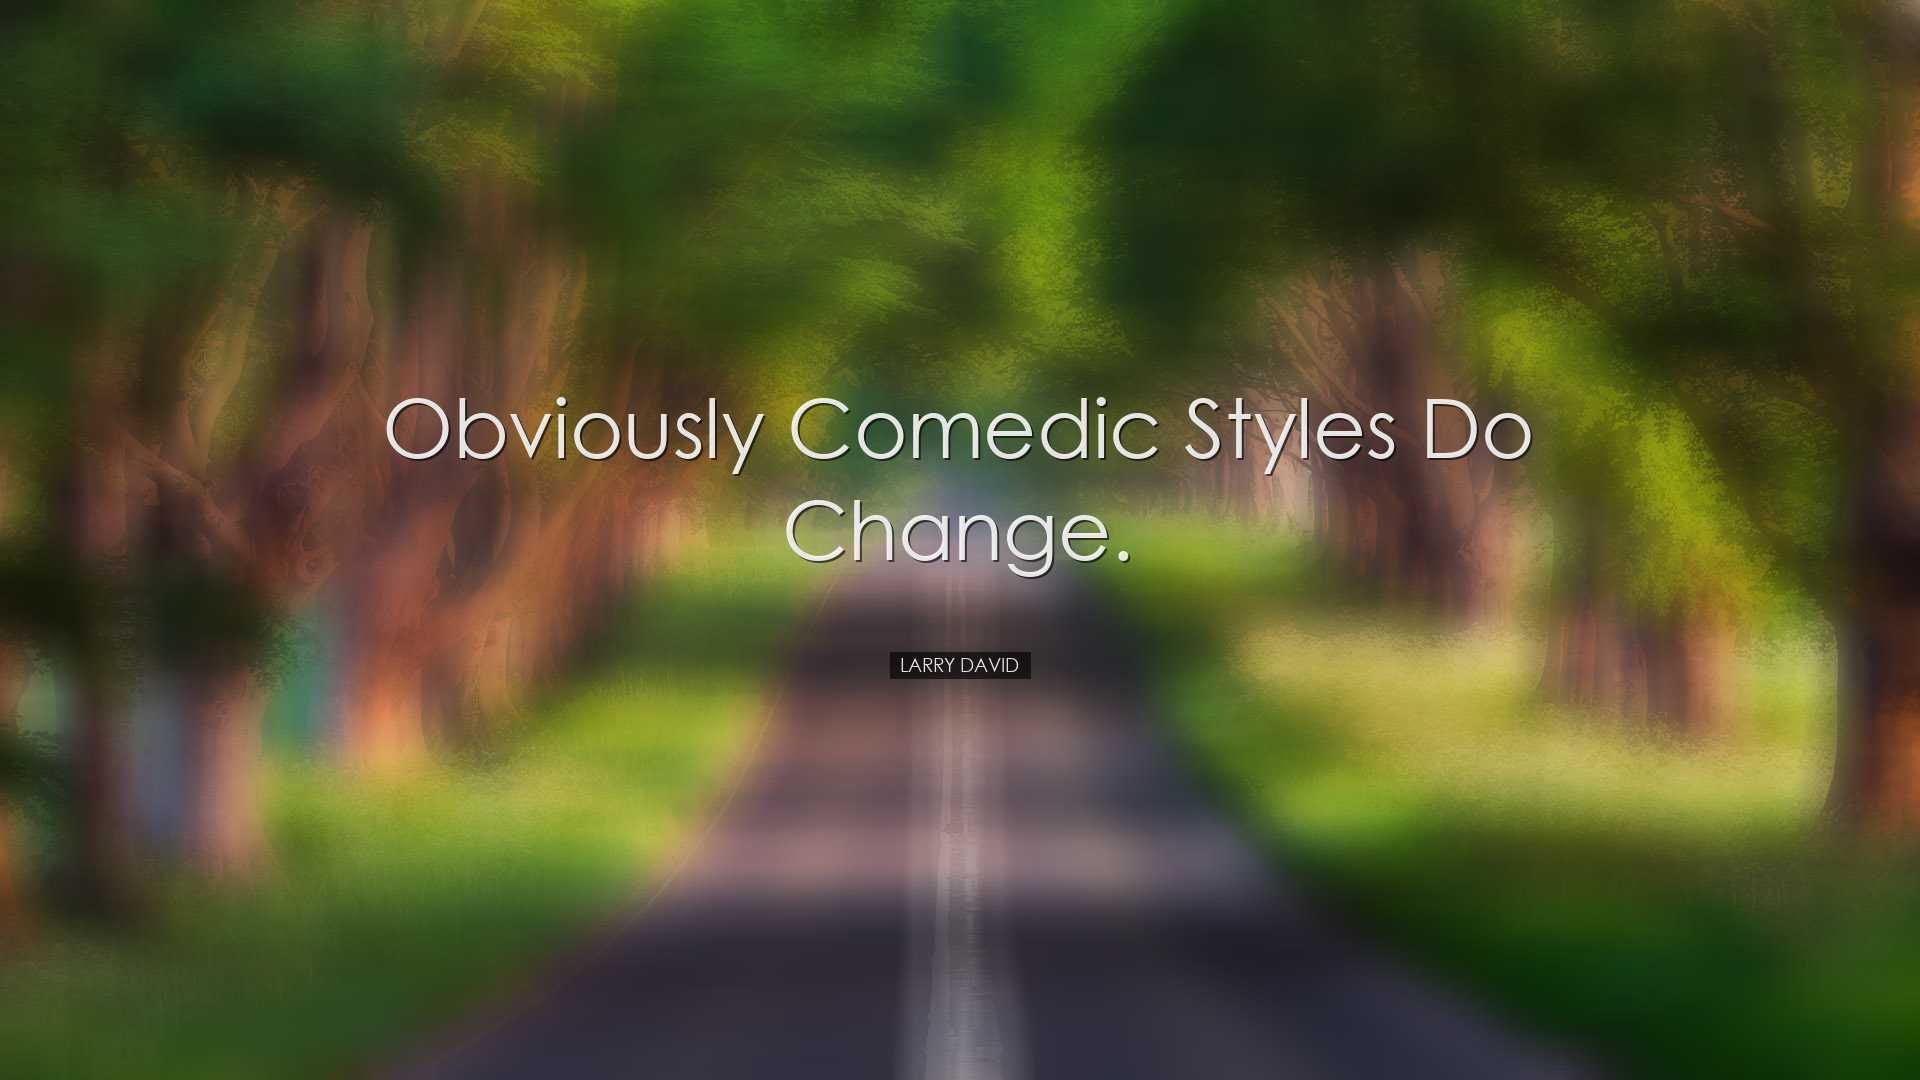 Obviously comedic styles do change. - Larry David